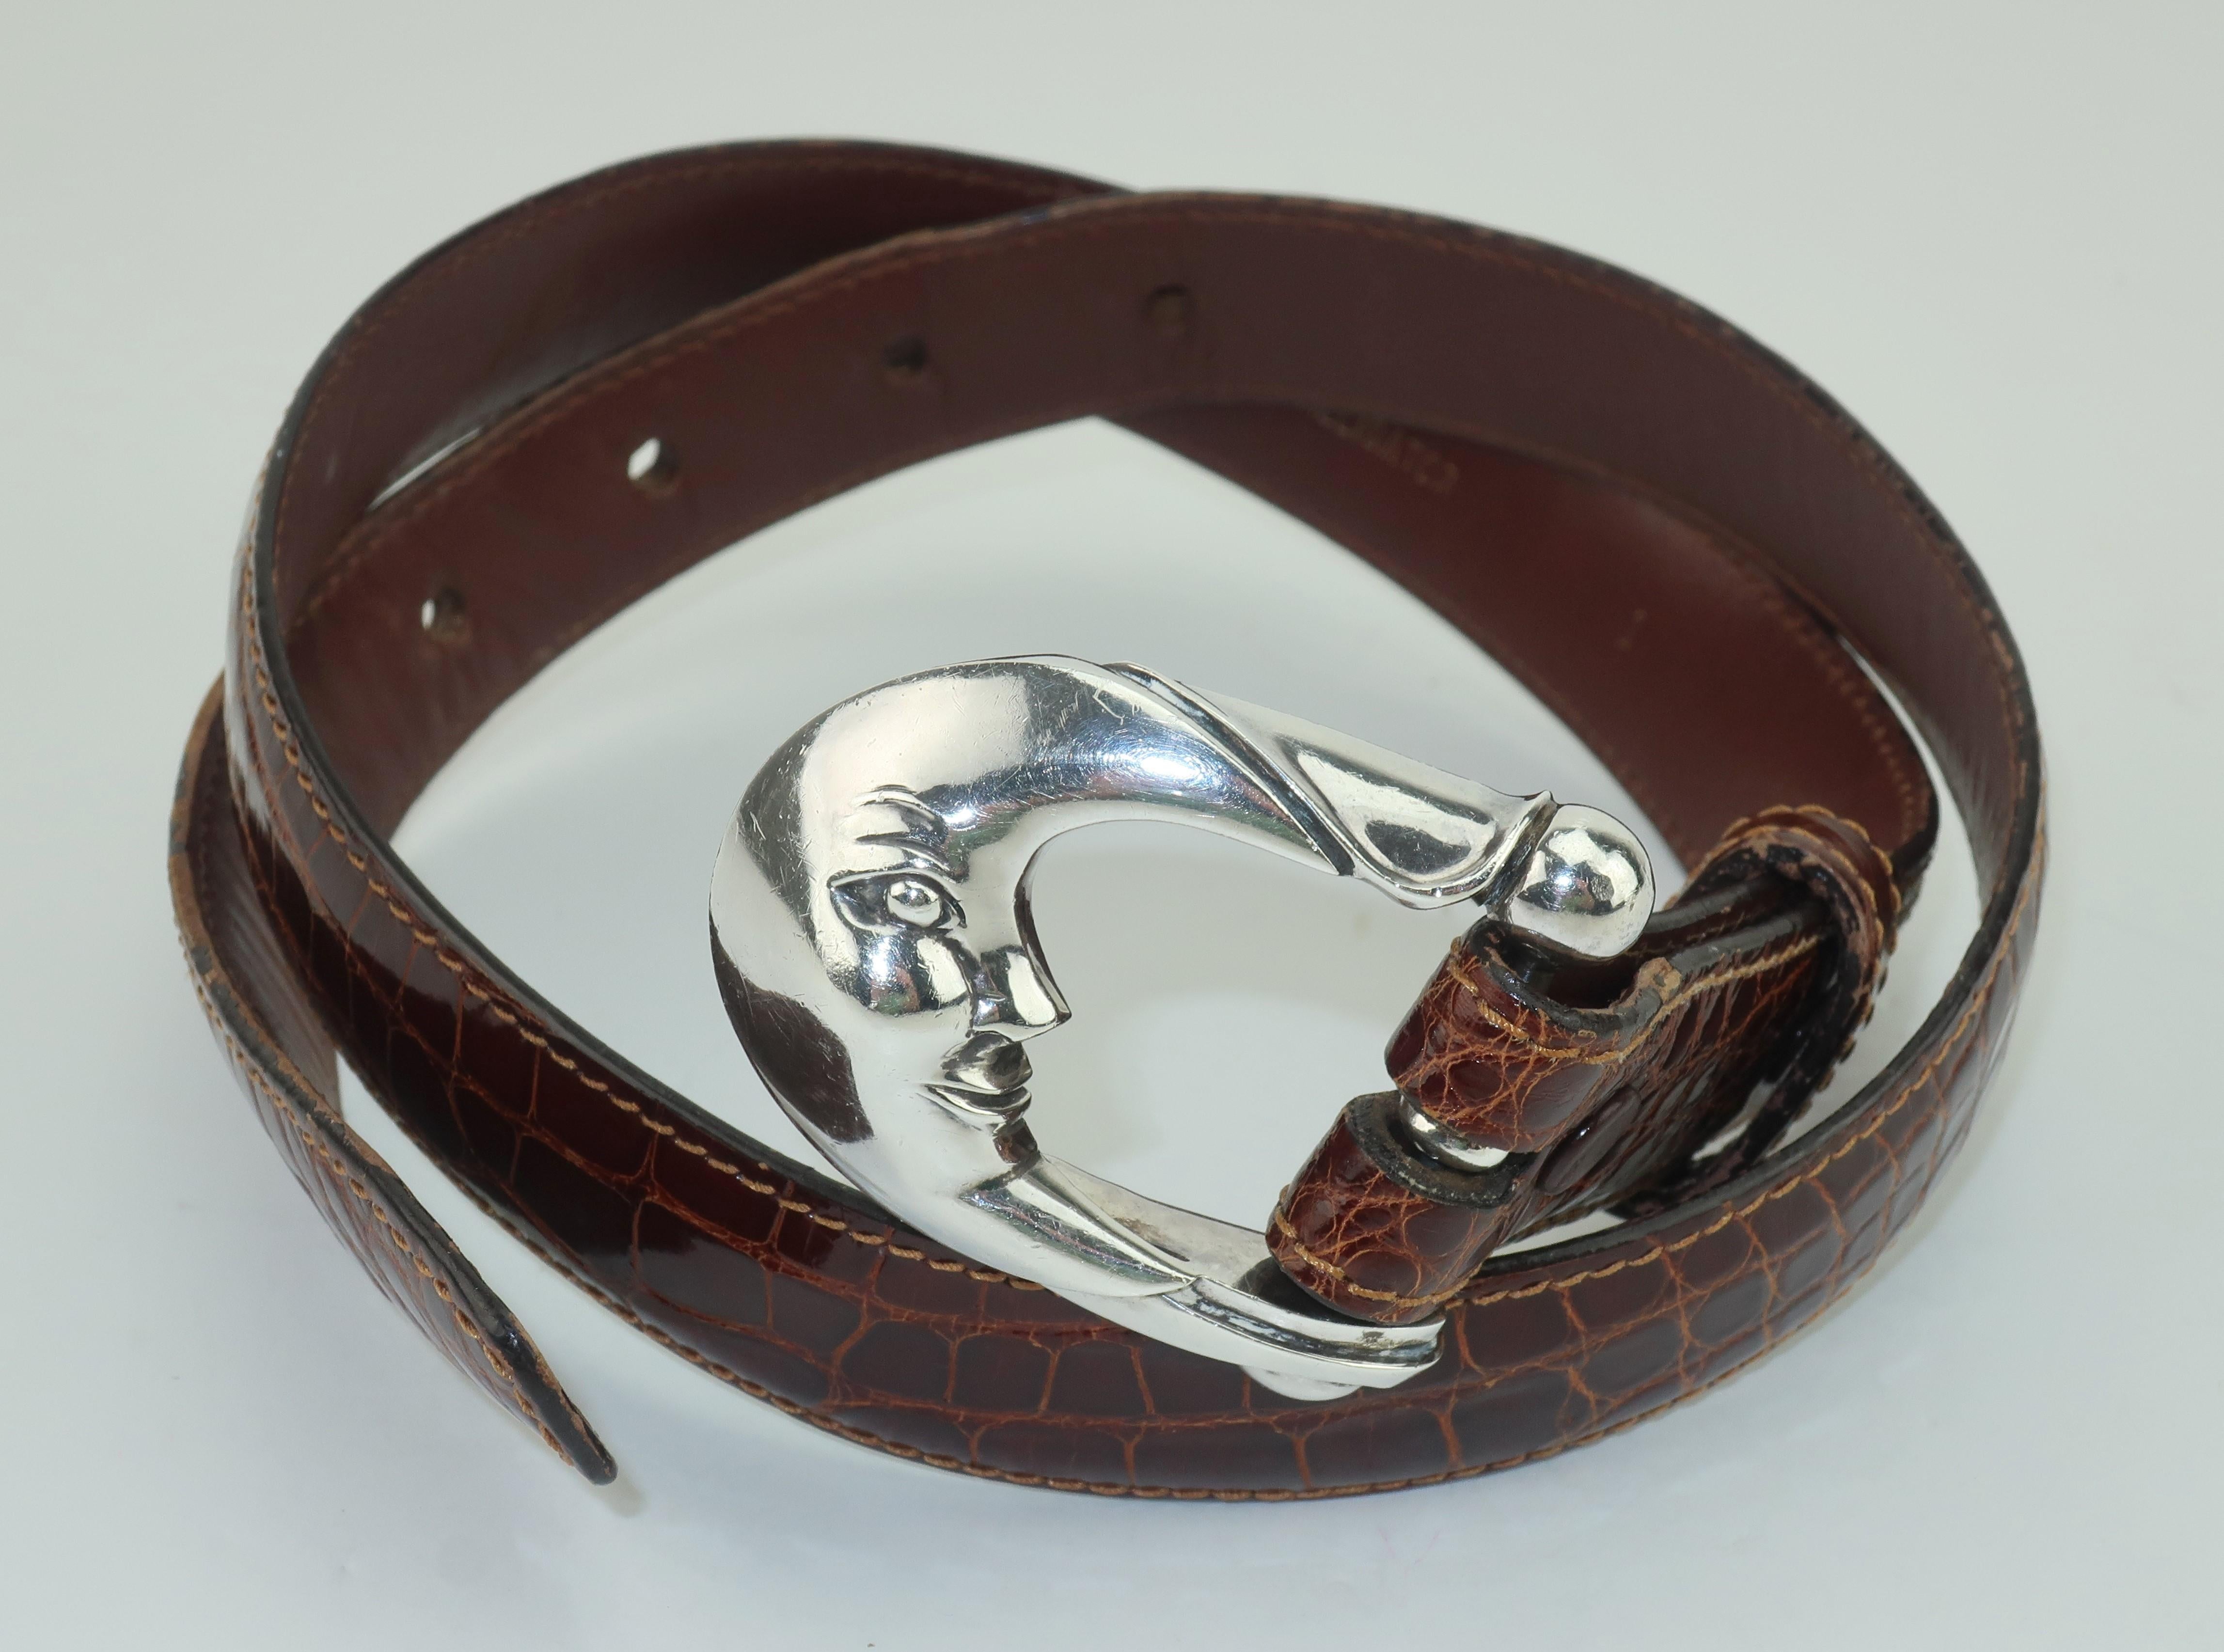 Buckle?...Sculpture?...Jewelry?  How about all three!  Barry Kieselstein-Cord describes himself as an artist and refers to his work as sculpture.  This sterling silver moon buckle is great evidence to support that statement ... not to mention that